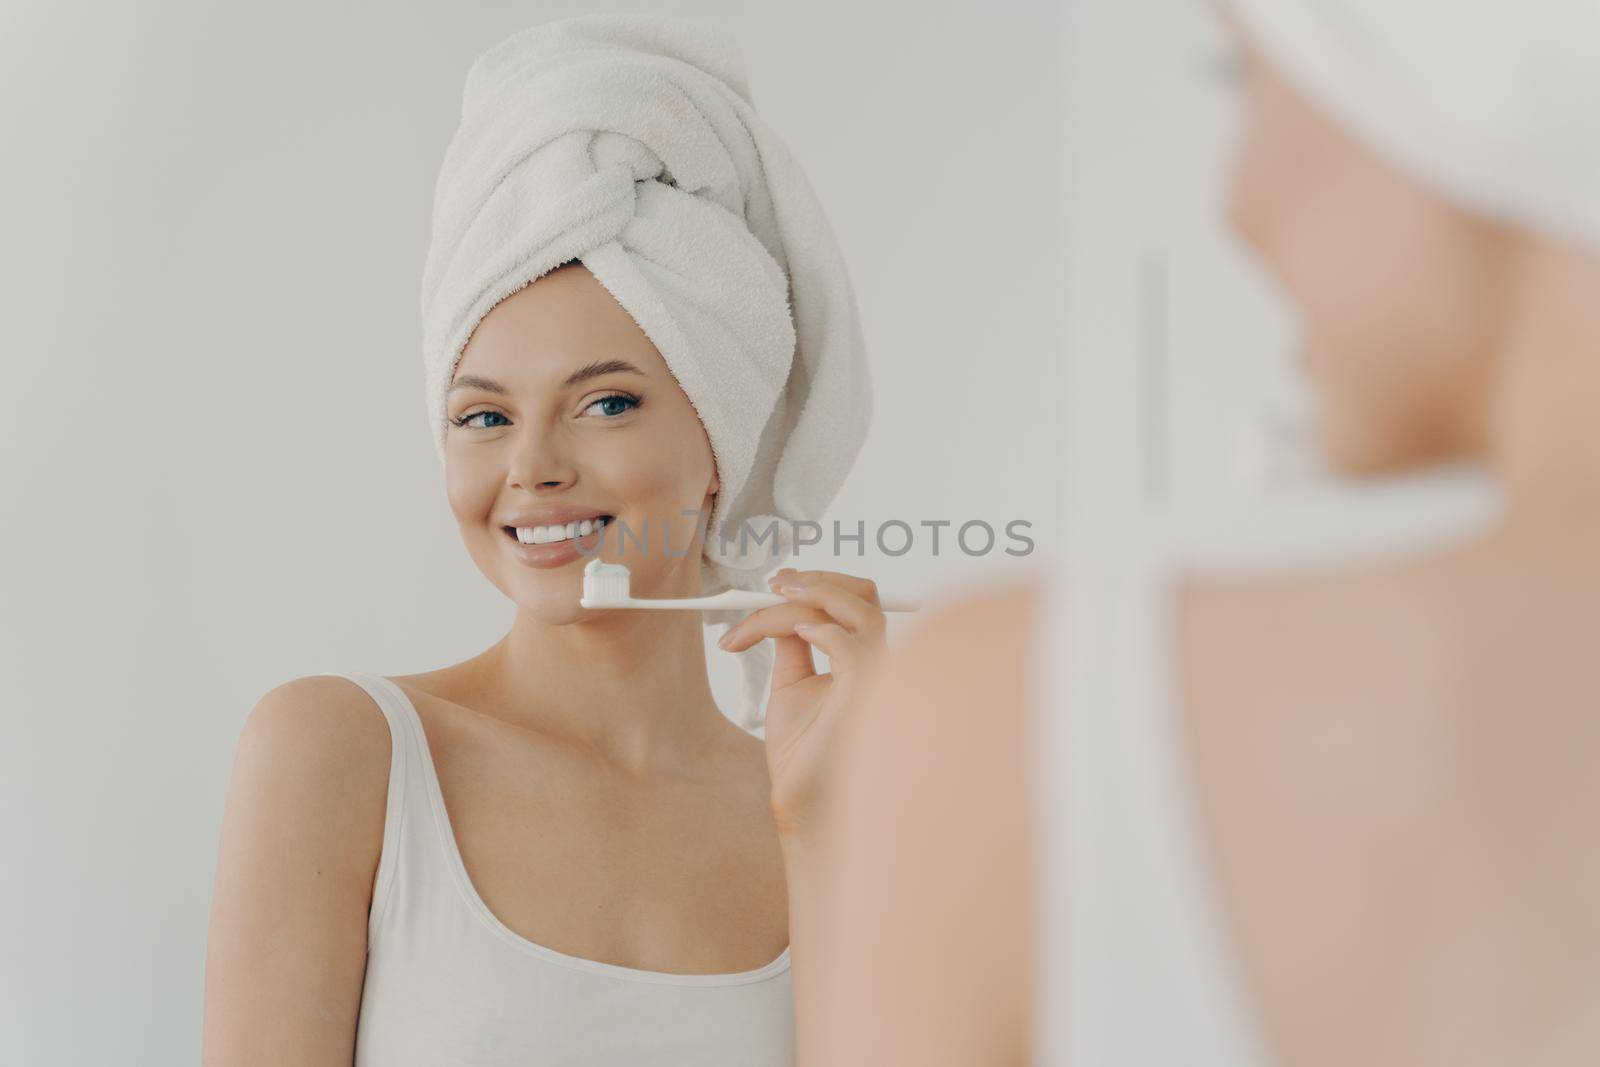 Beautiful young woman with healthy perfect smile brushing teeth and looking in mirror, attractive young female wearing white bath towel on head standing in bathroom at home. Oral hygiene concept